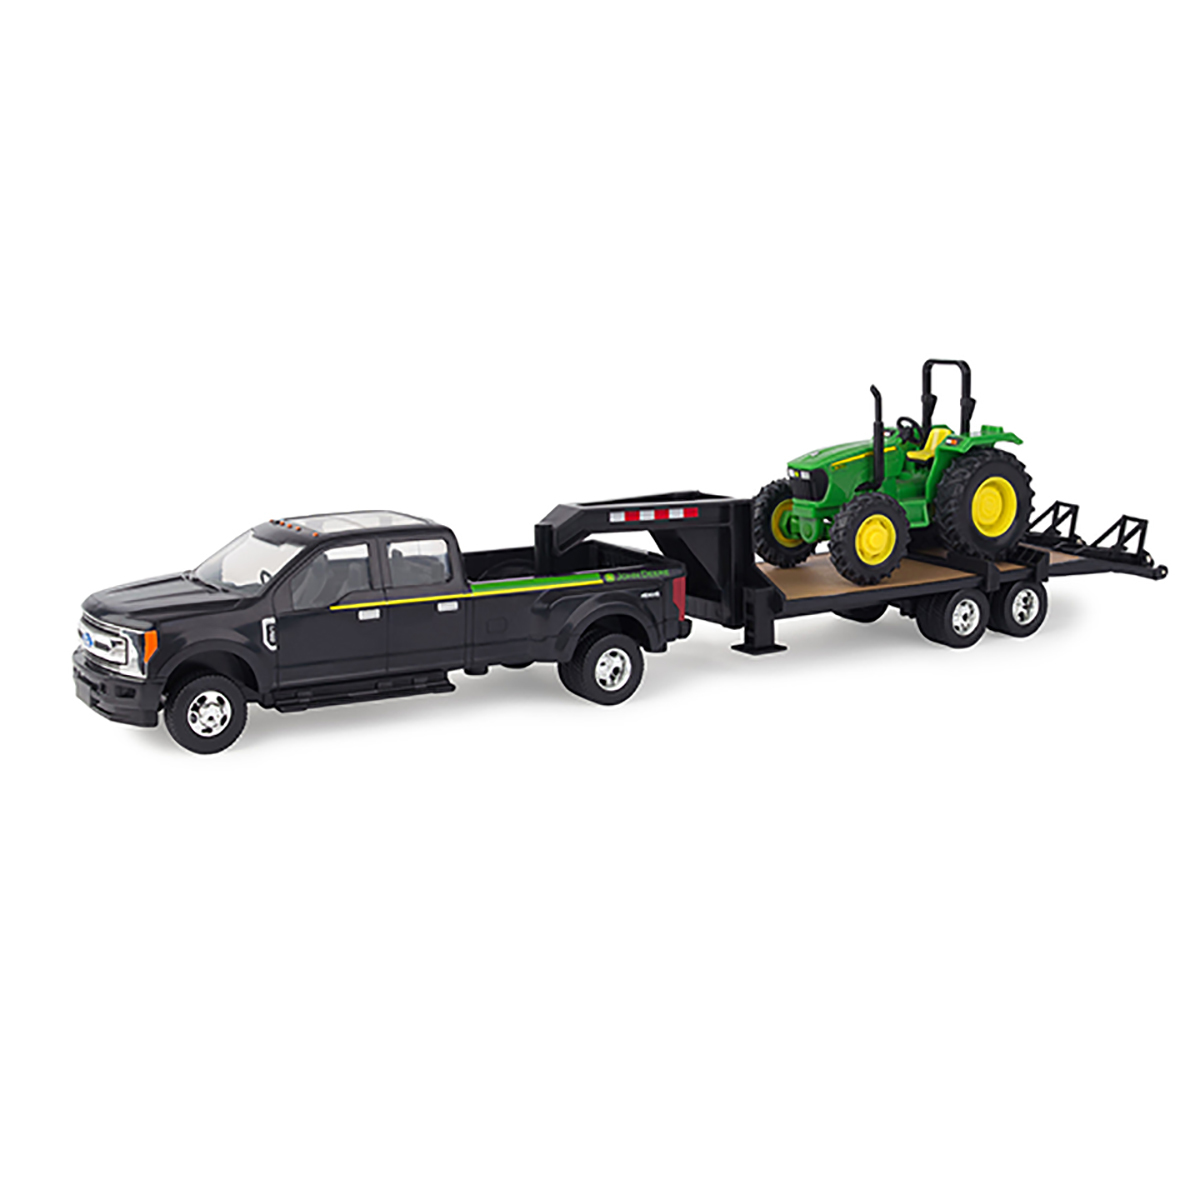 John Deere 1/32 Ford Pickup with Accessory Set #LP70553 